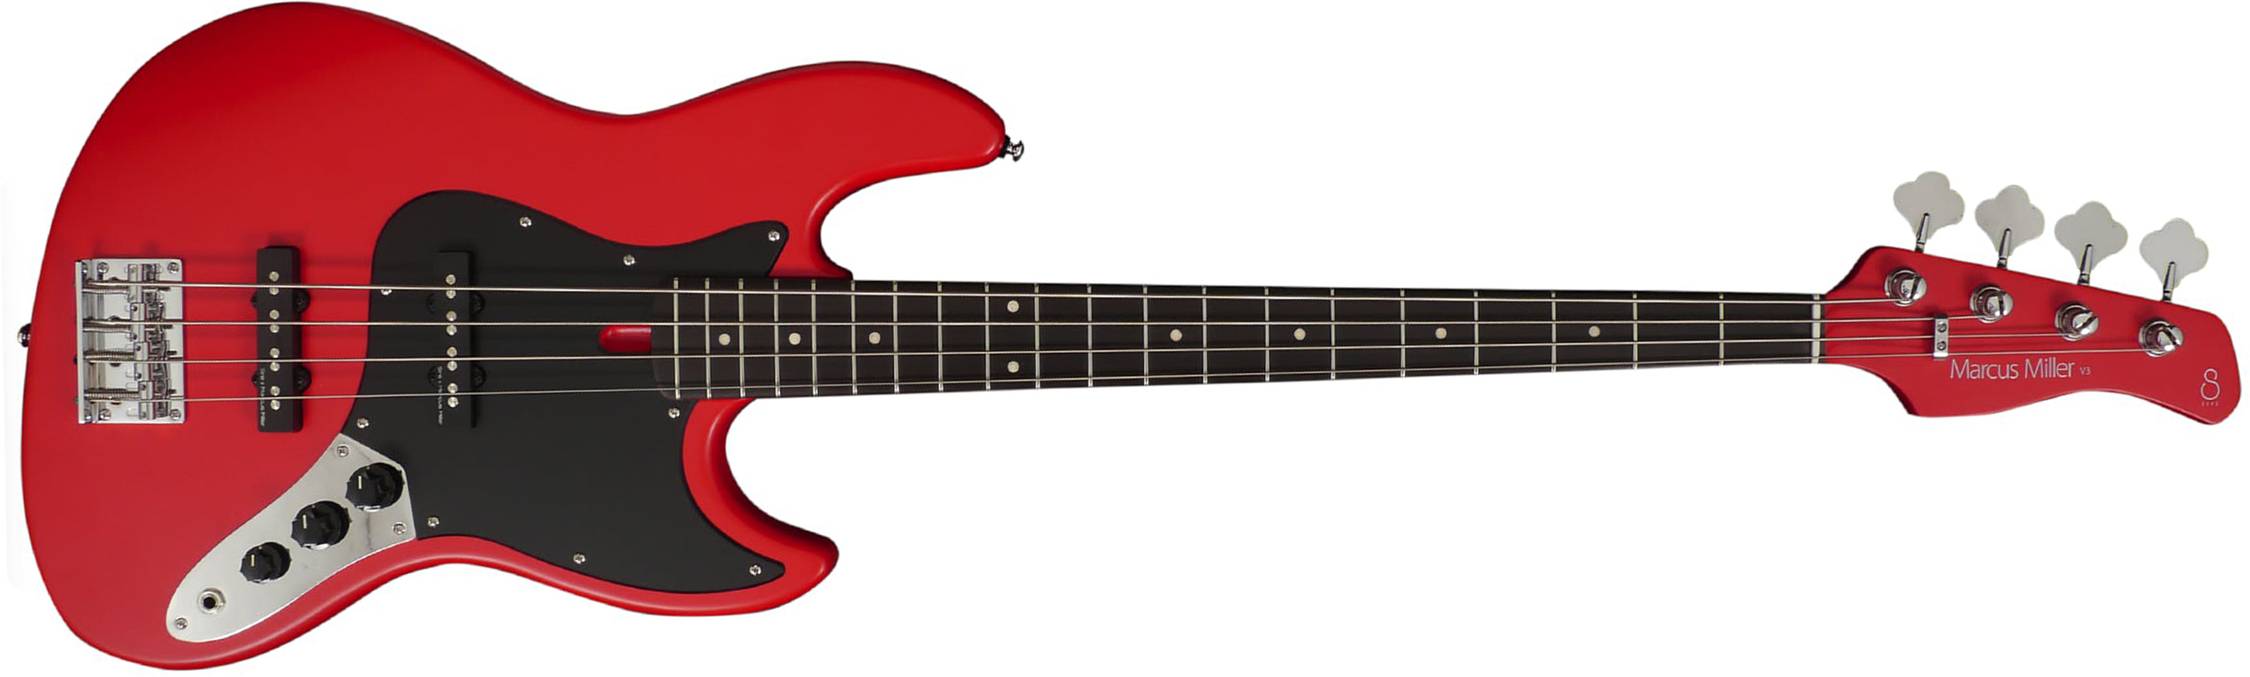 Marcus Miller V3p 4st Rw - Red Satin - Solid body elektrische bas - Main picture